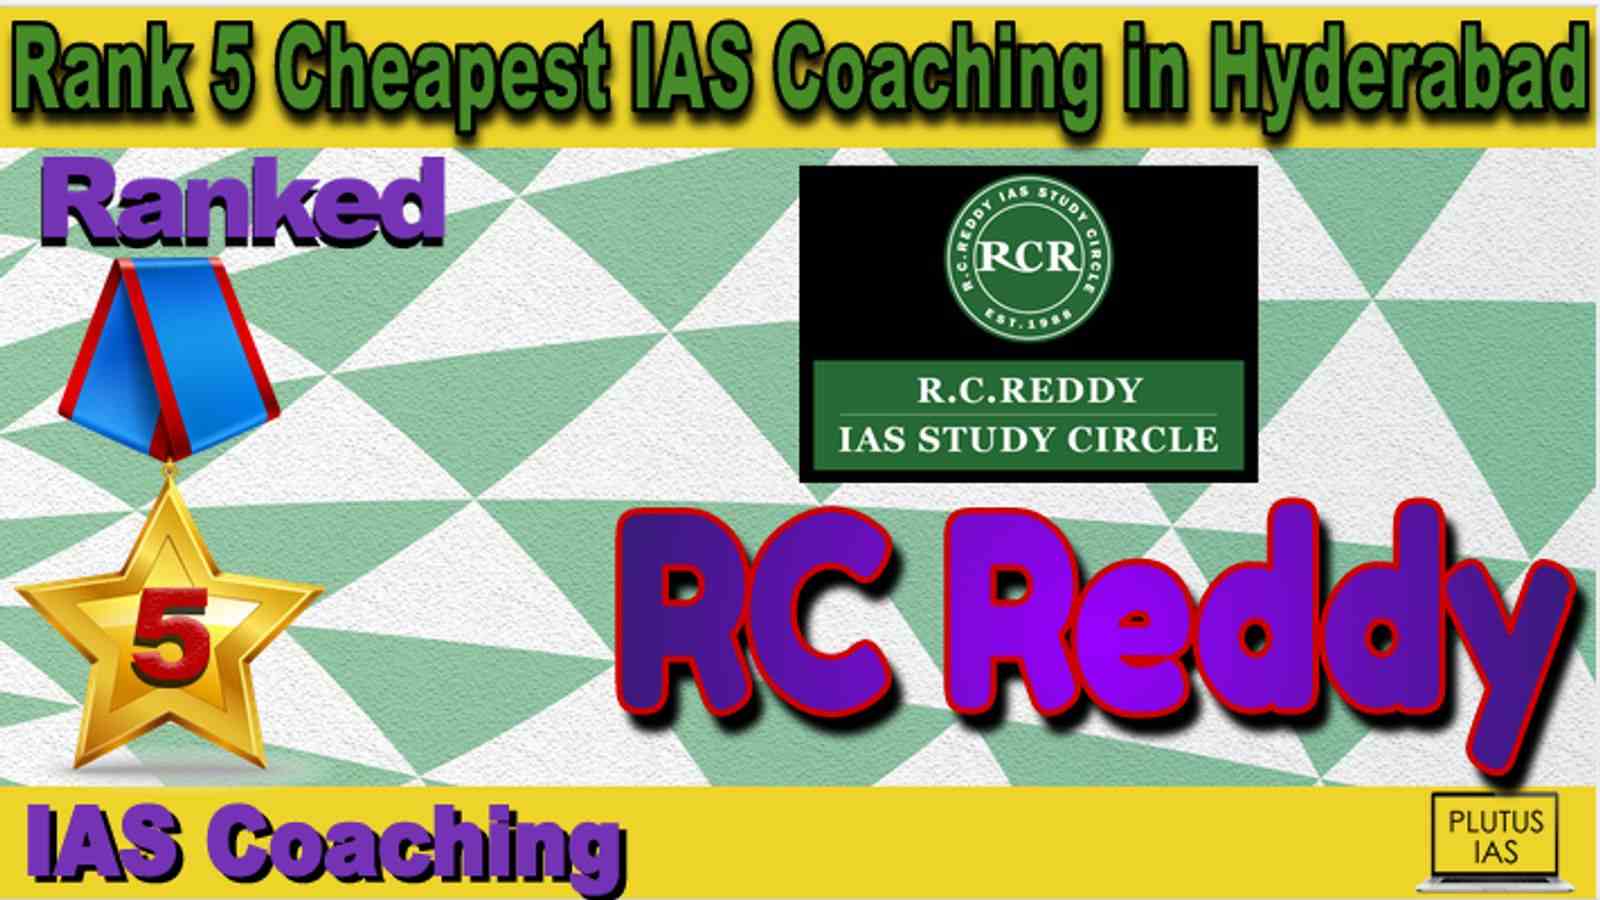 Rank 5 Cheapest IAS Coaching in Hyderabad